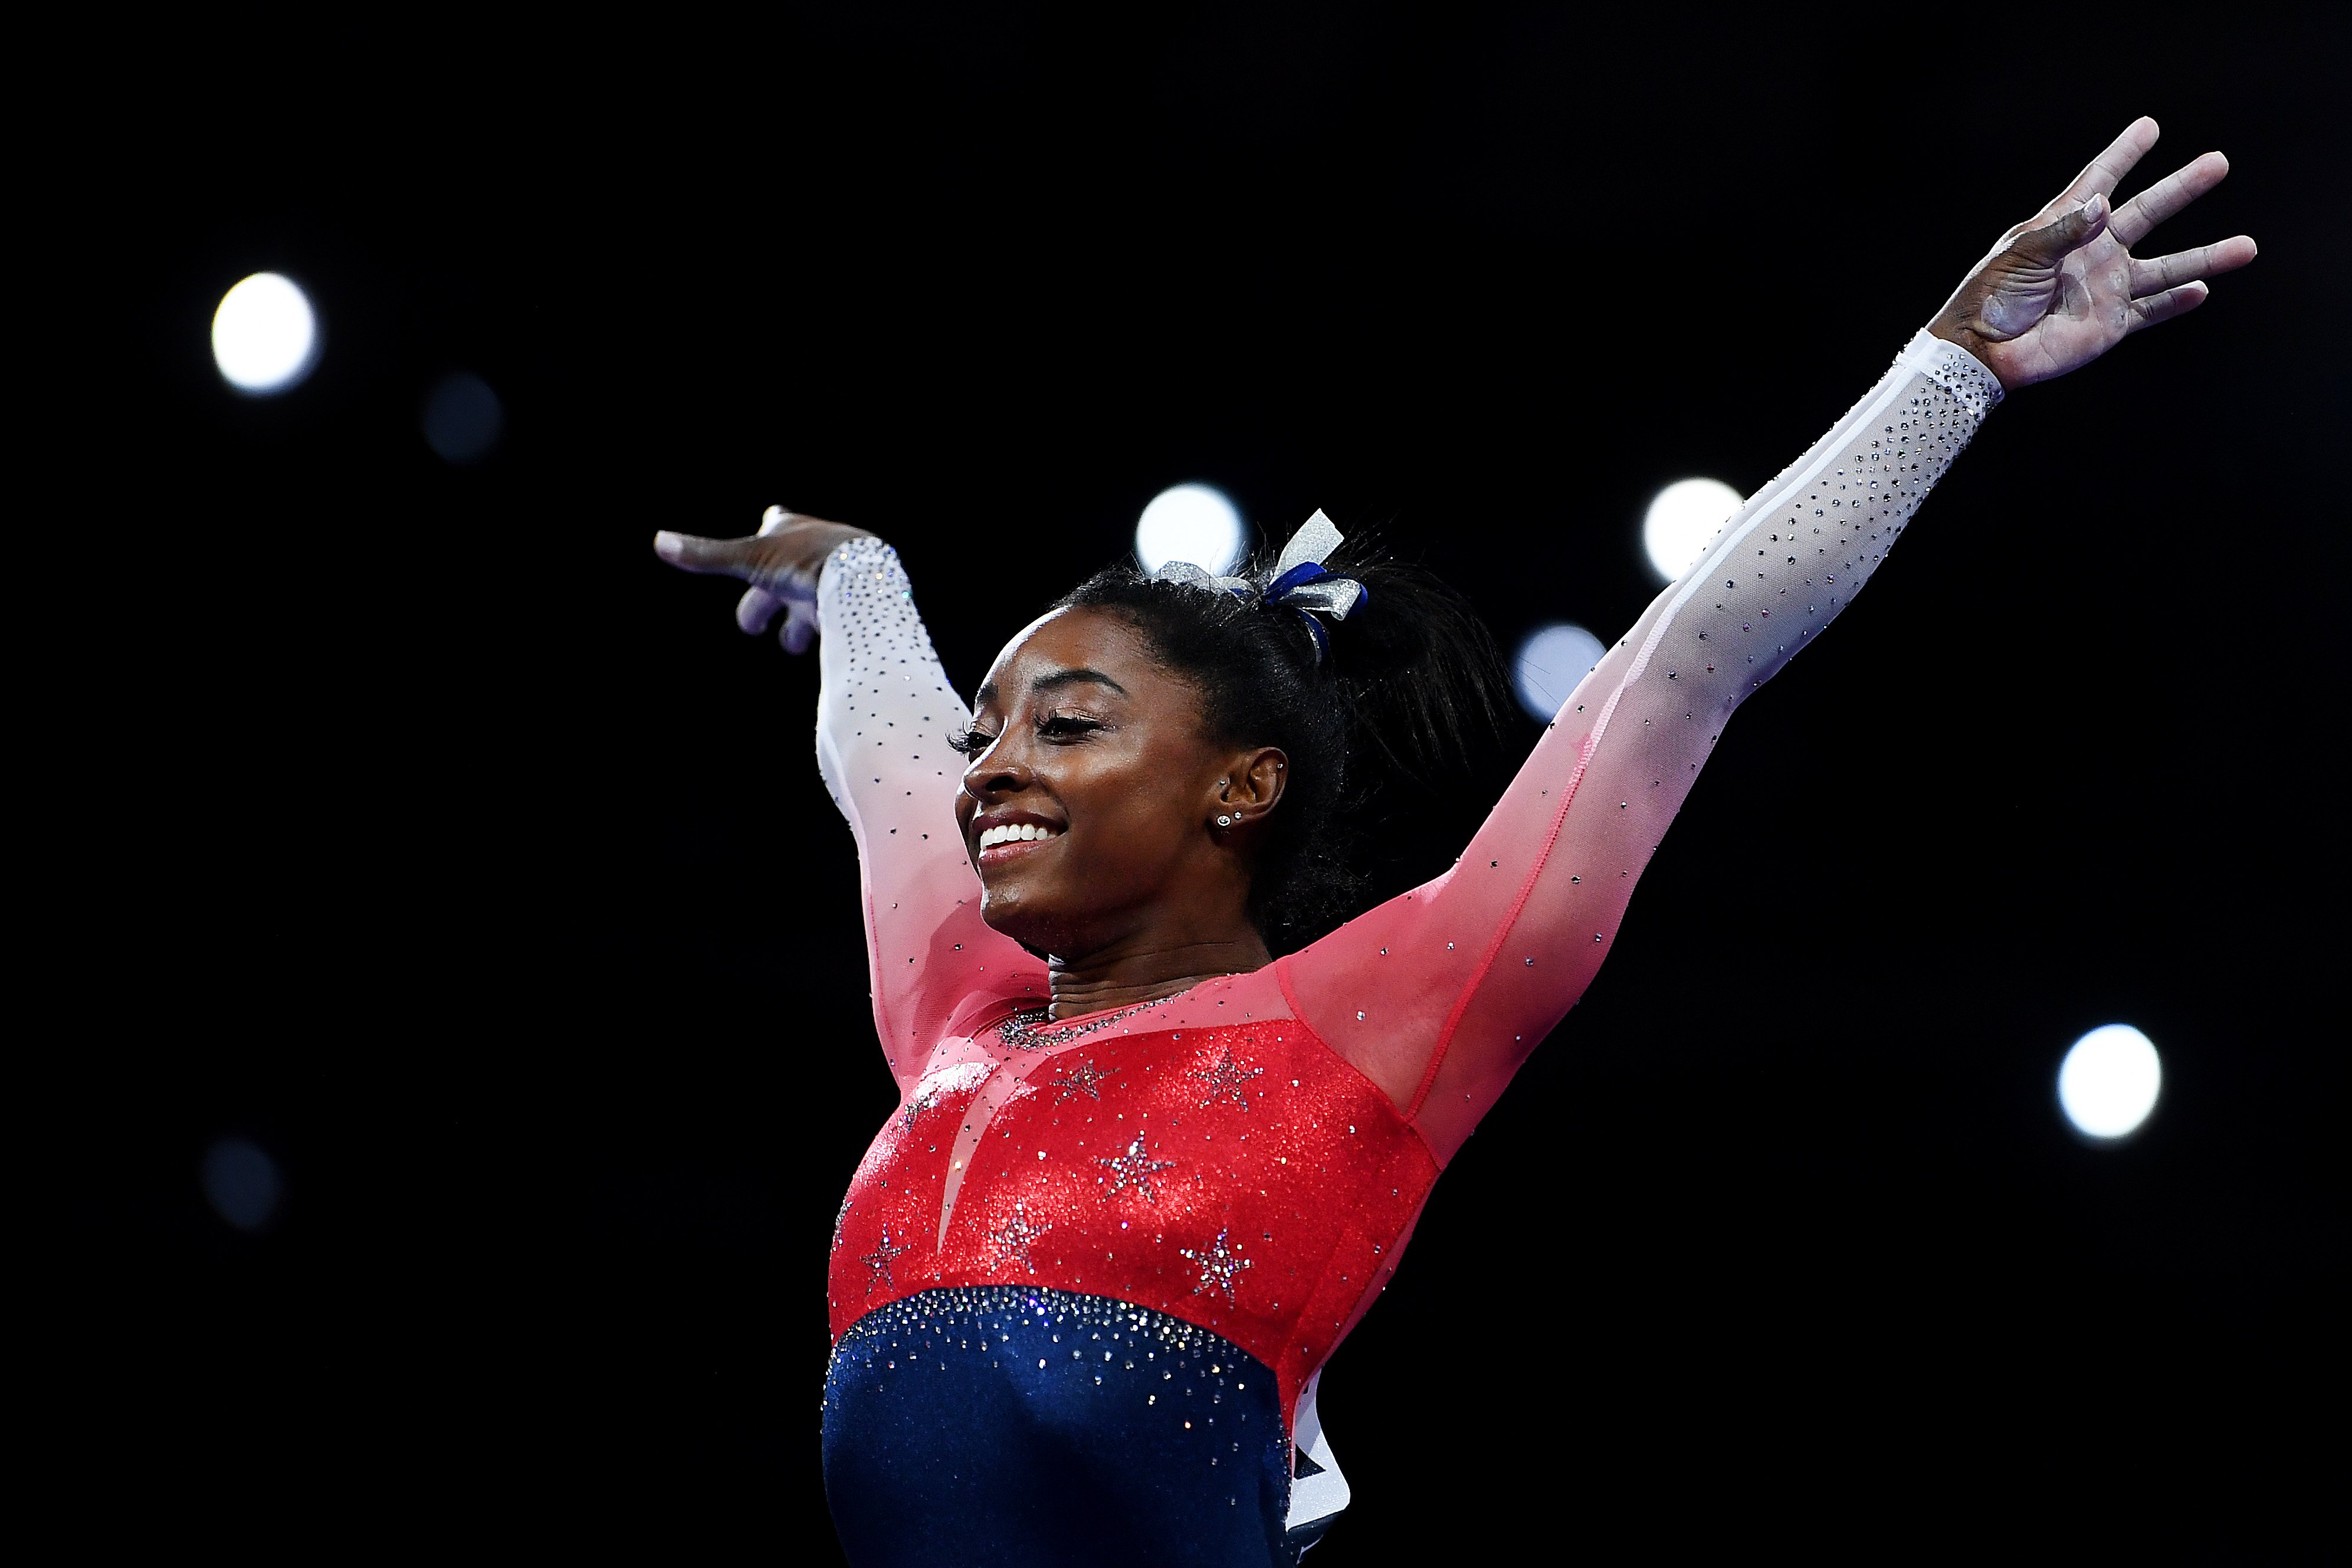 Simone Biles at the FIG Artistic Gymnastics World Championships on October 08, 2019 in Stuttgart, Germany. | Source: Getty Images